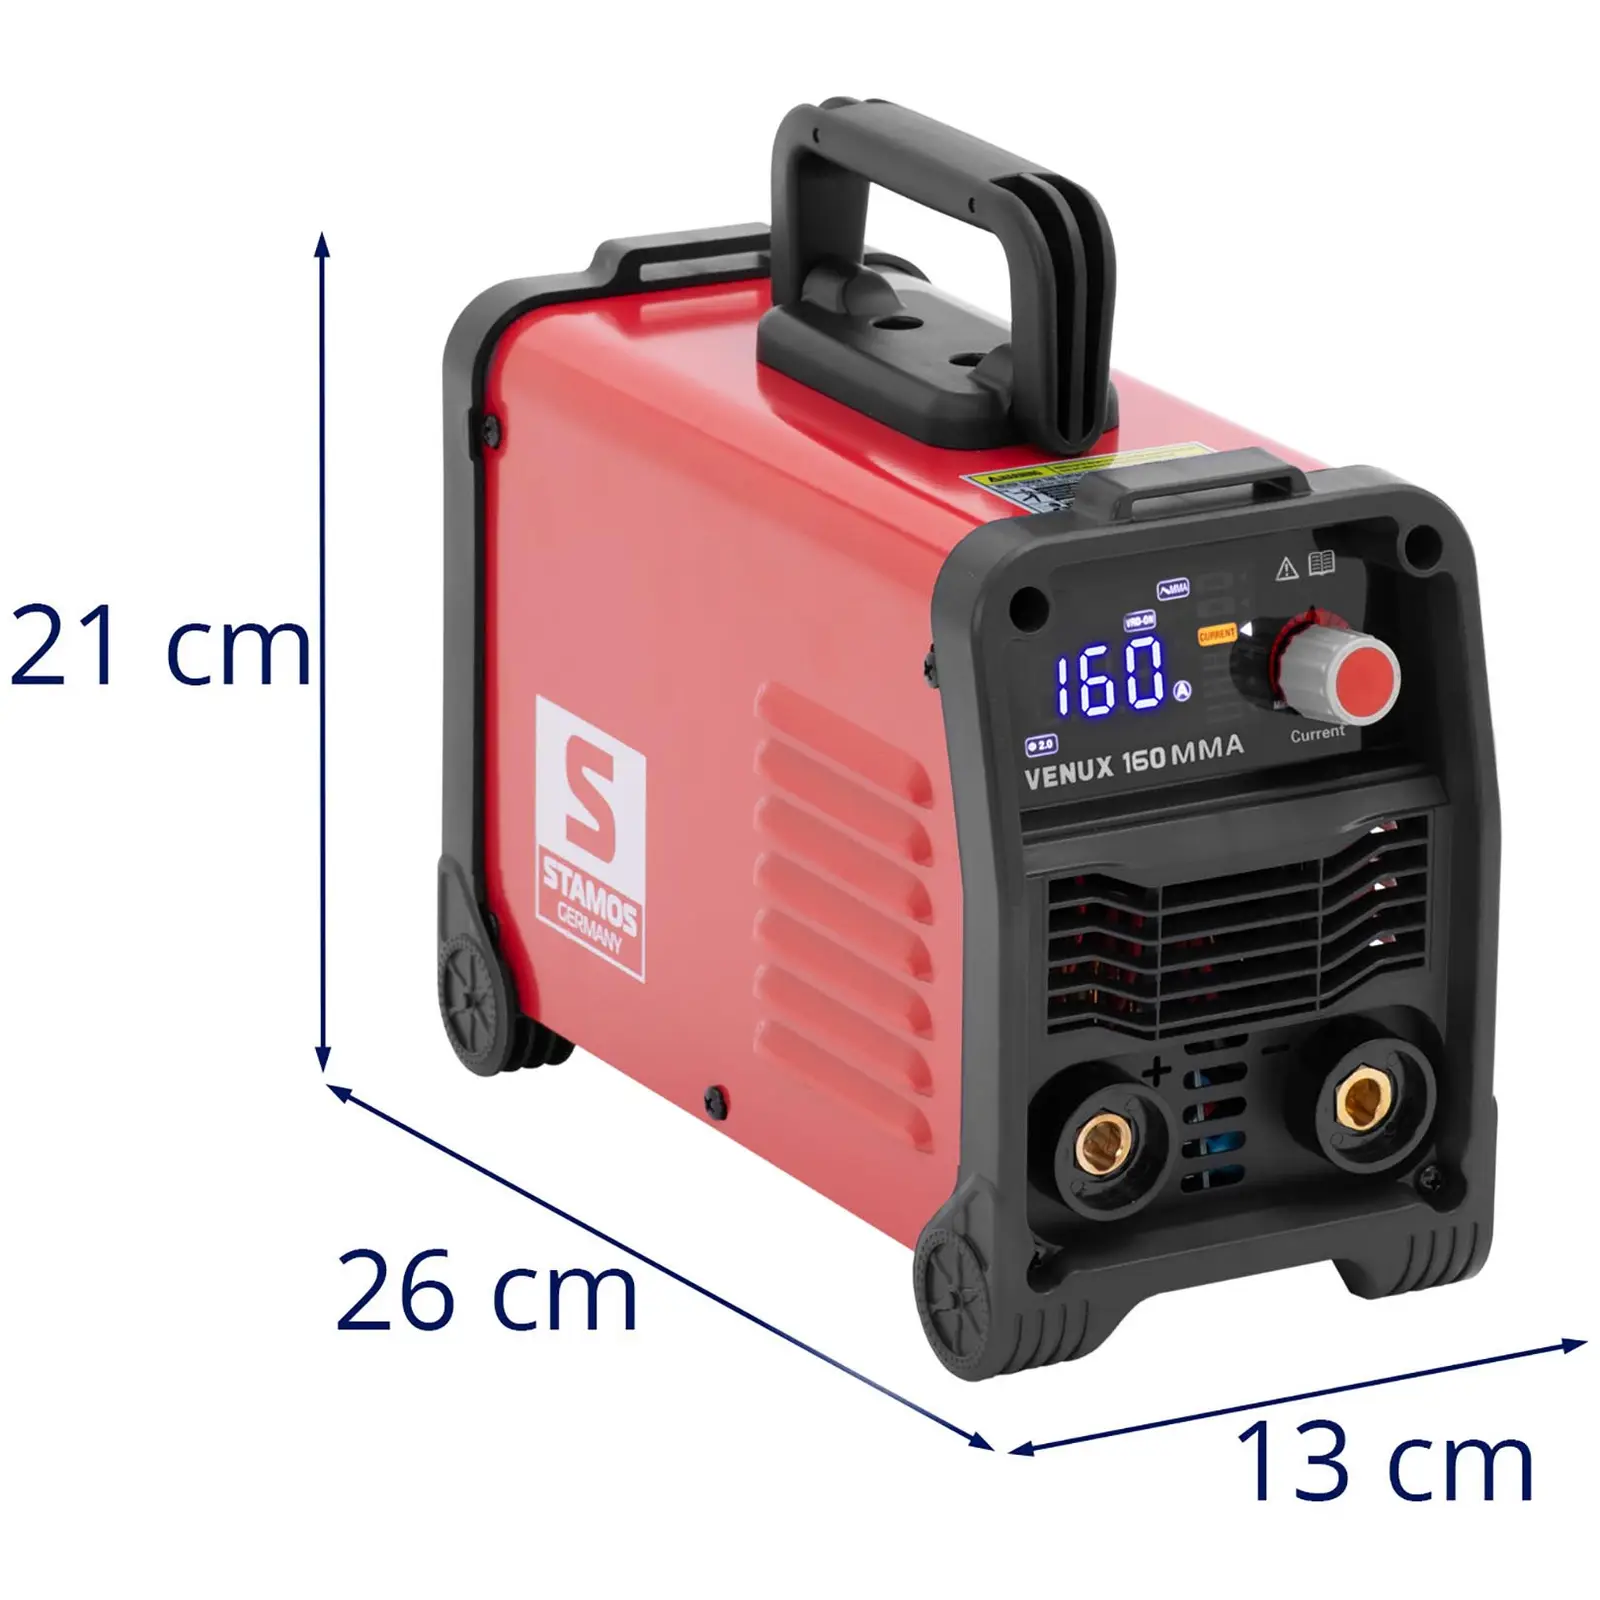 Arc Welder with Smart Select System - TIG Lift-Arc - 160 A - 60 % duty cycle - Hot Start - Arc Force - Anti-Stick - VRD